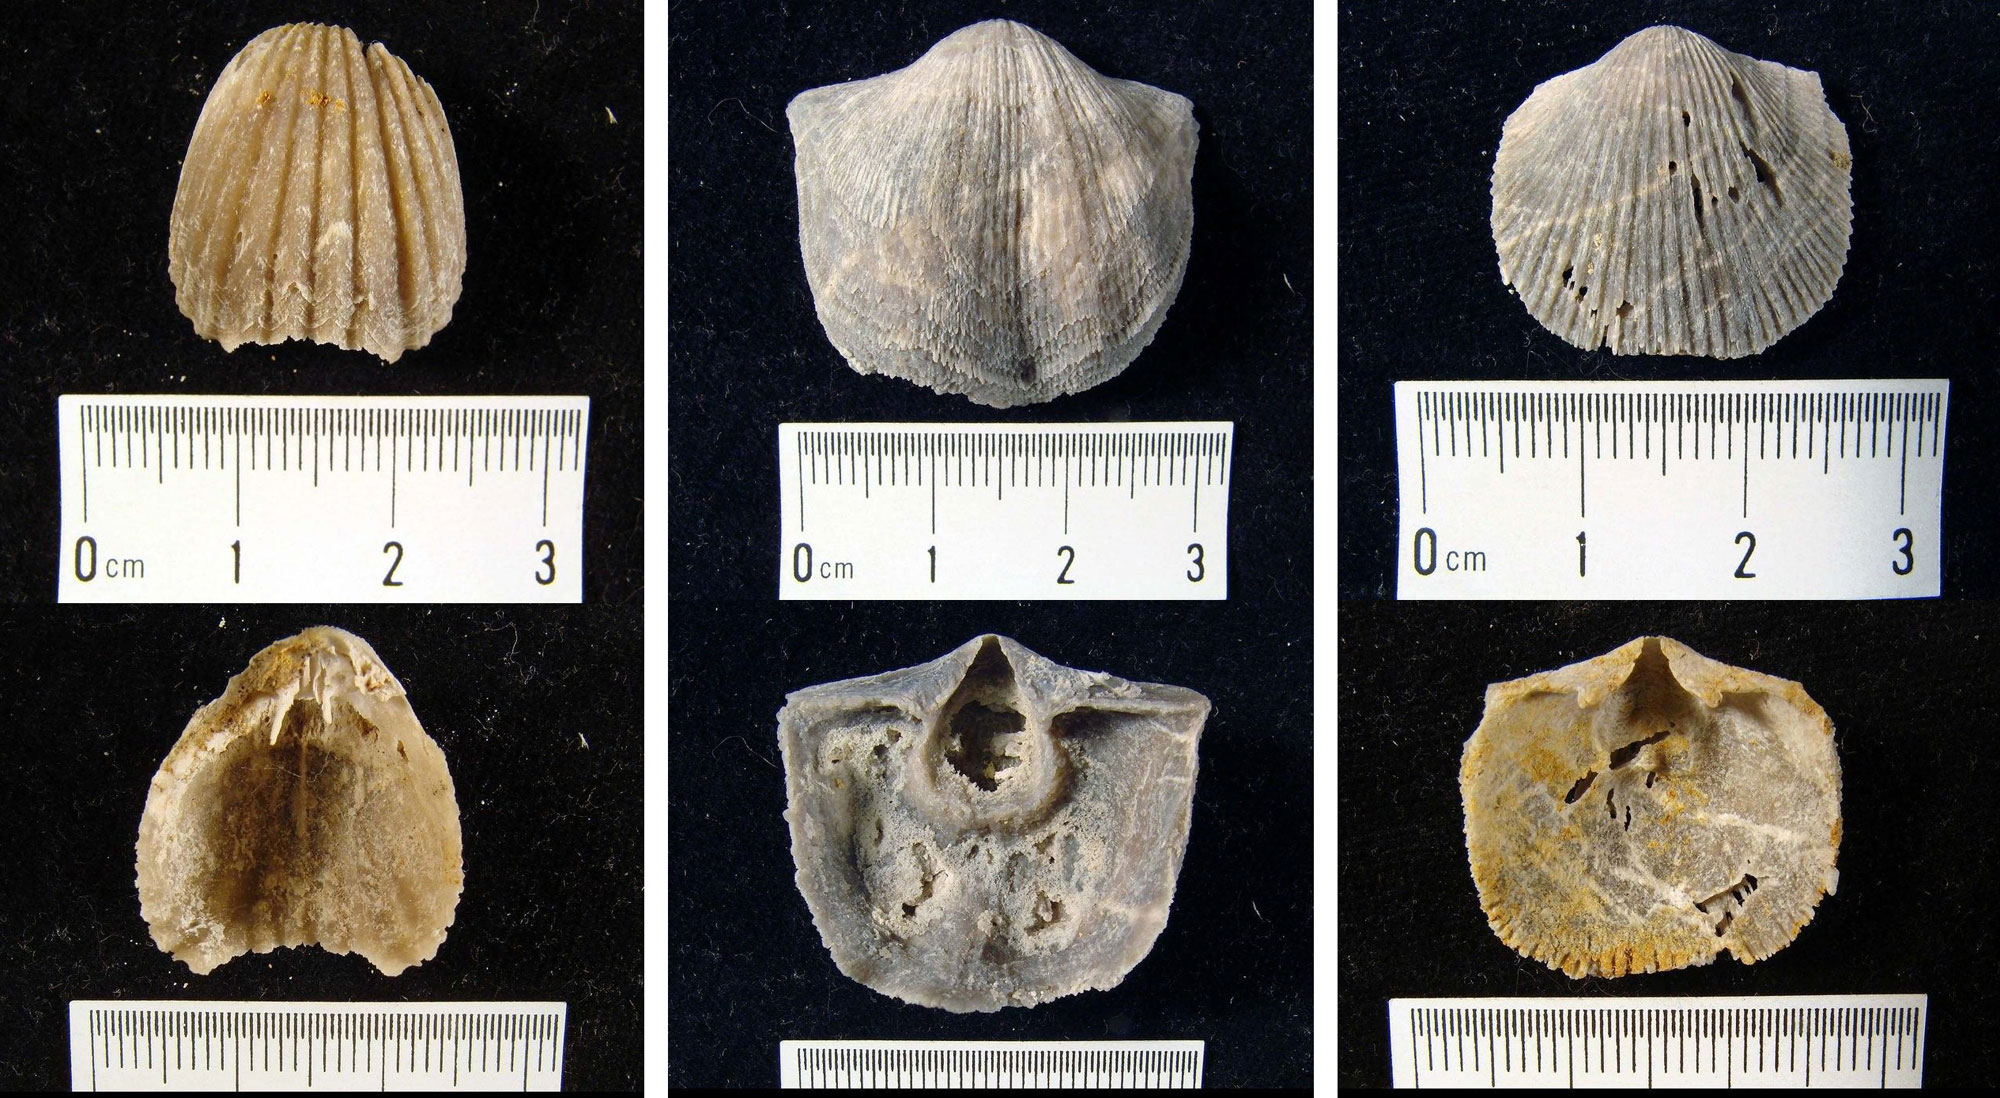 3-Panel image showing photos of three types of brachiopods. The outer part of one valve and the inner part of another valve are shown for each brachiopod.